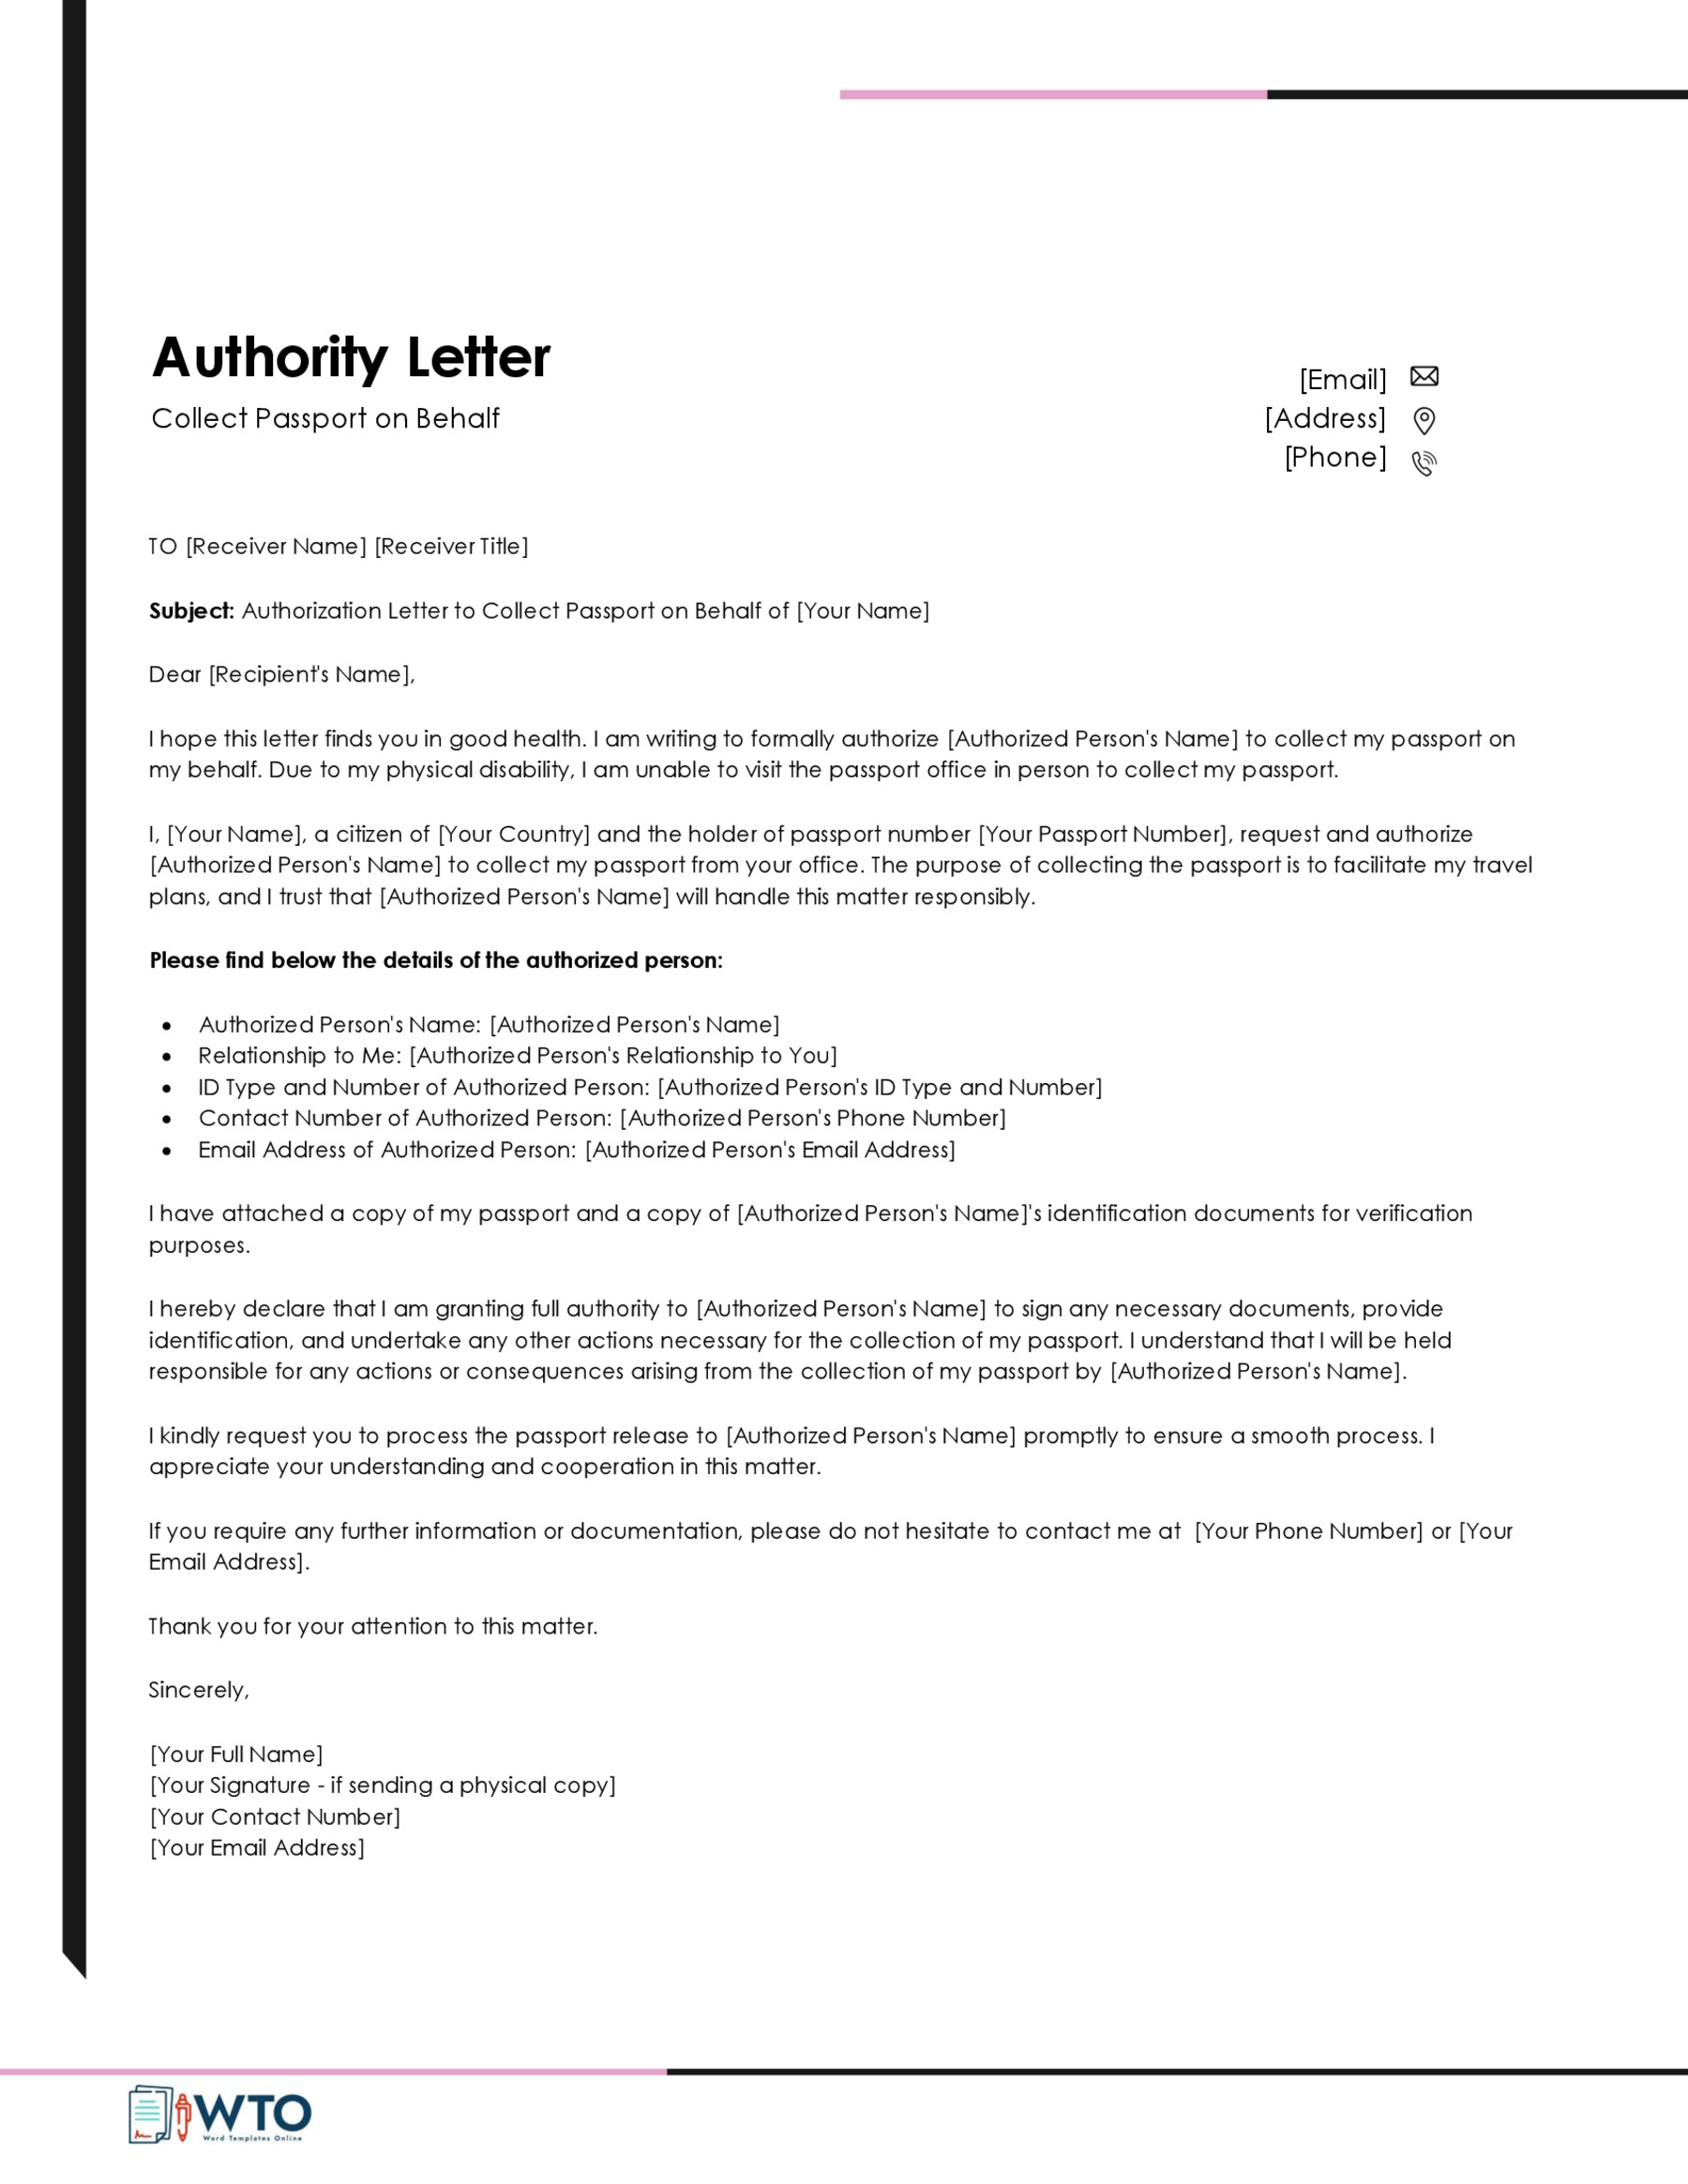 Authorization letter to collect passport Template-Downloadable word format